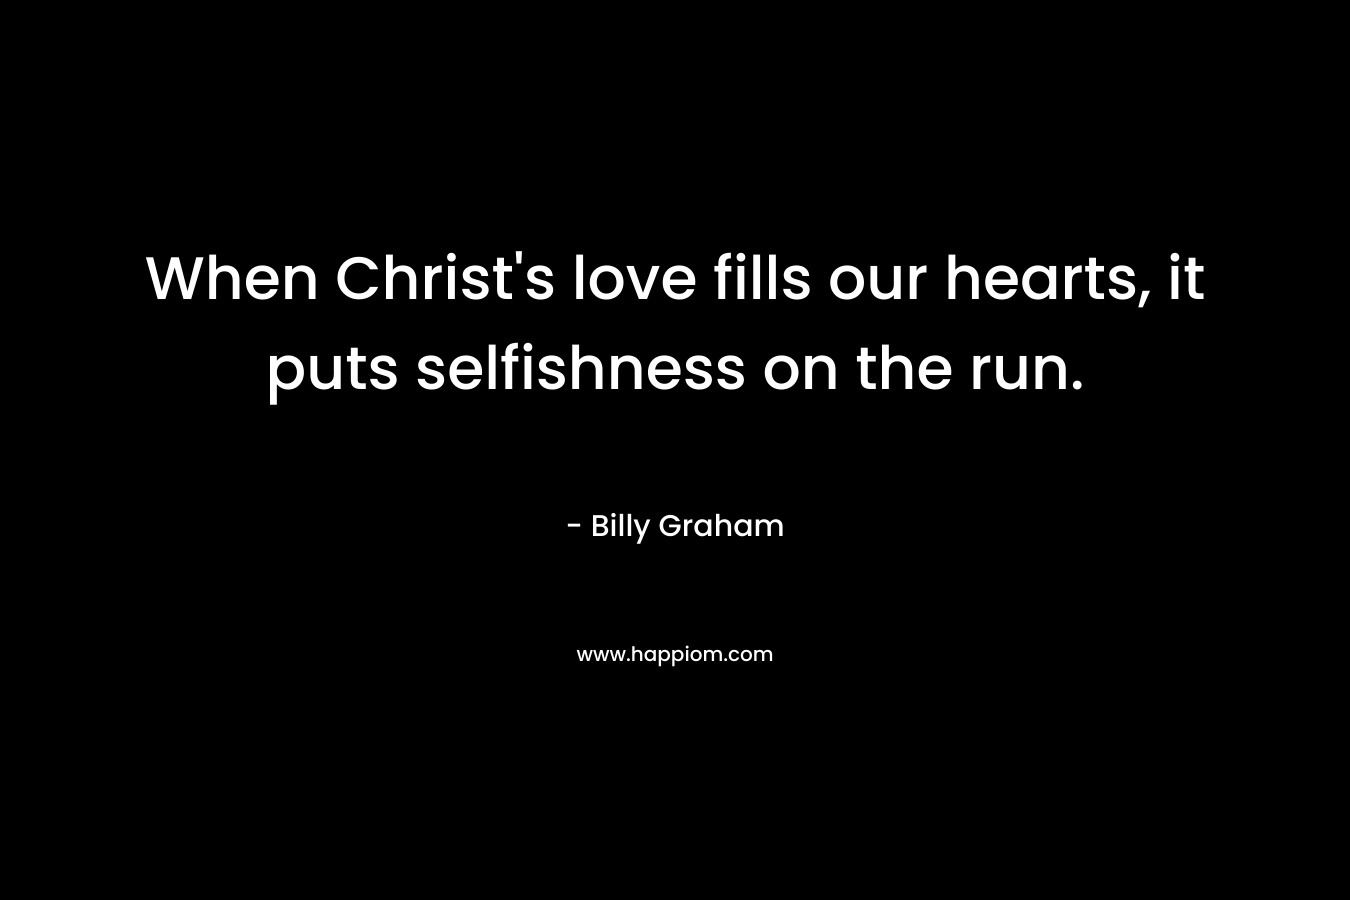 When Christ's love fills our hearts, it puts selfishness on the run.